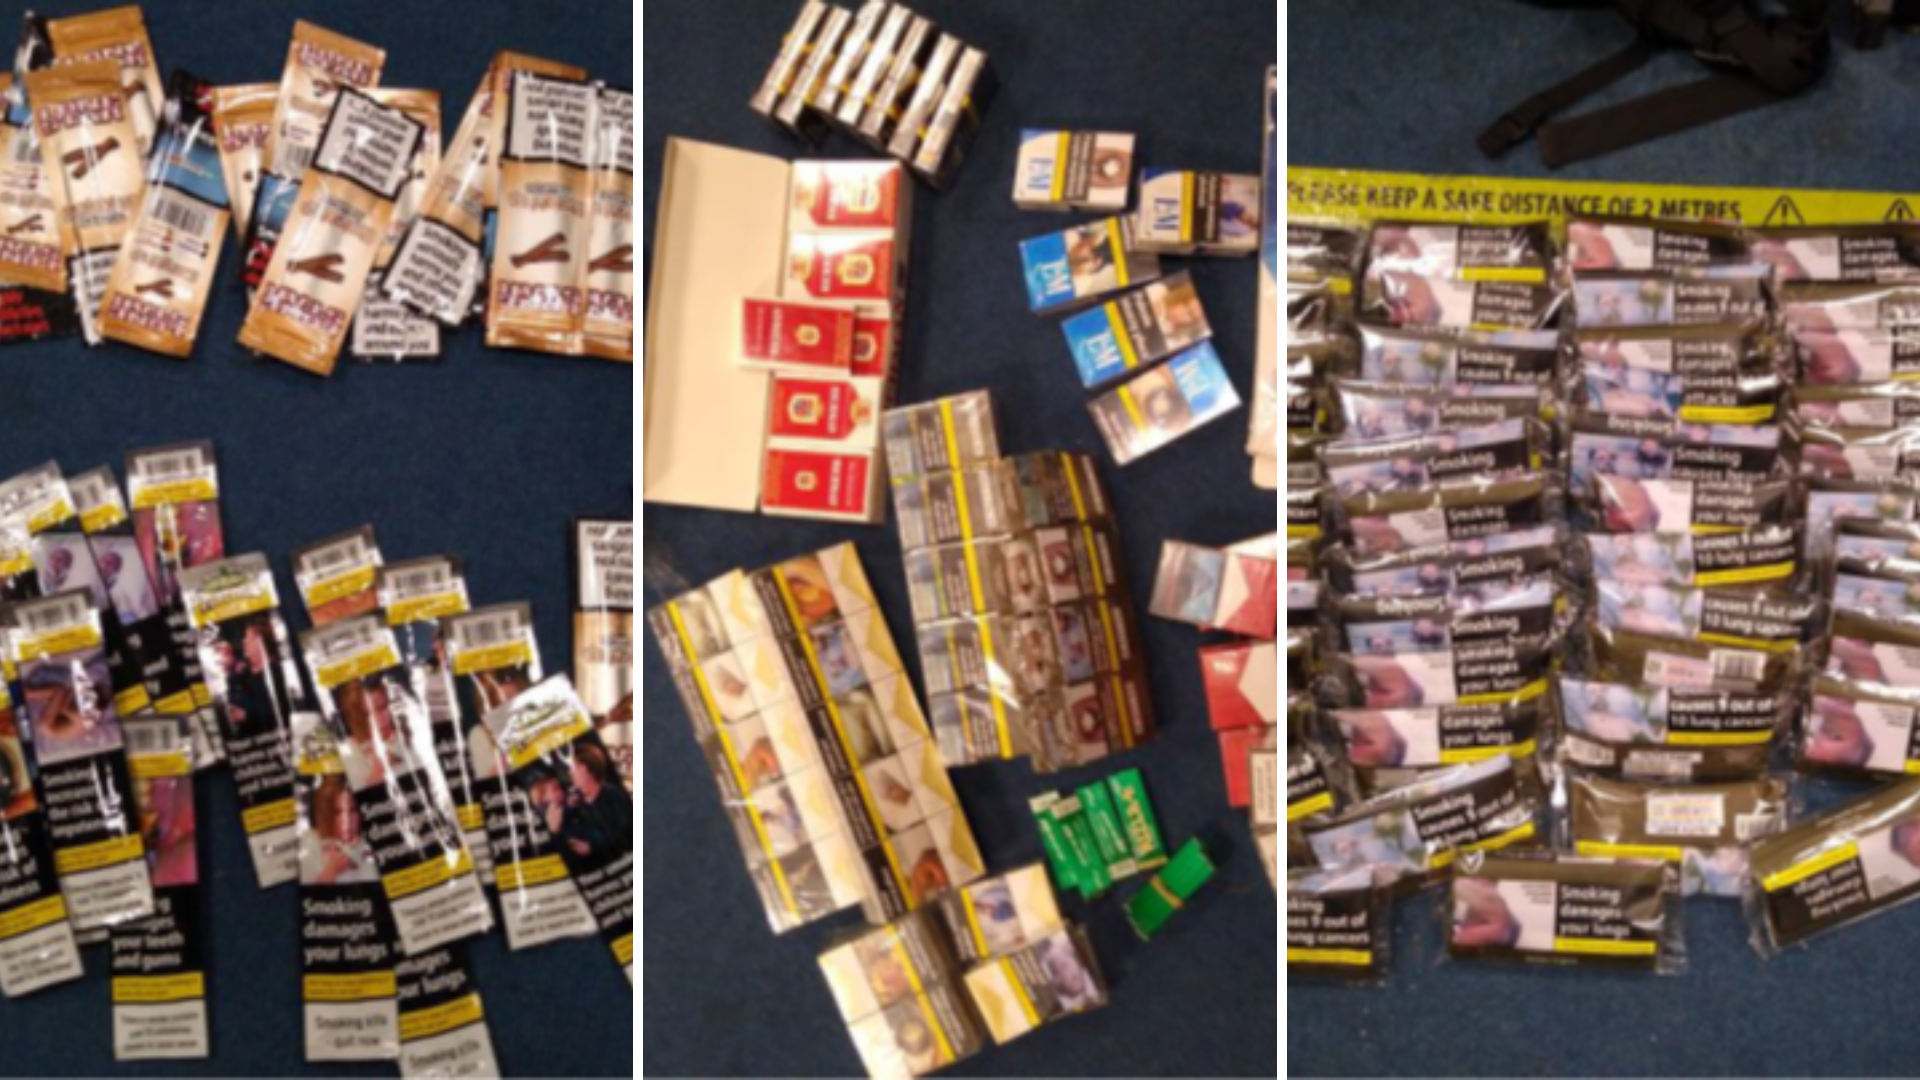 Illicit cigarette packets pilled up